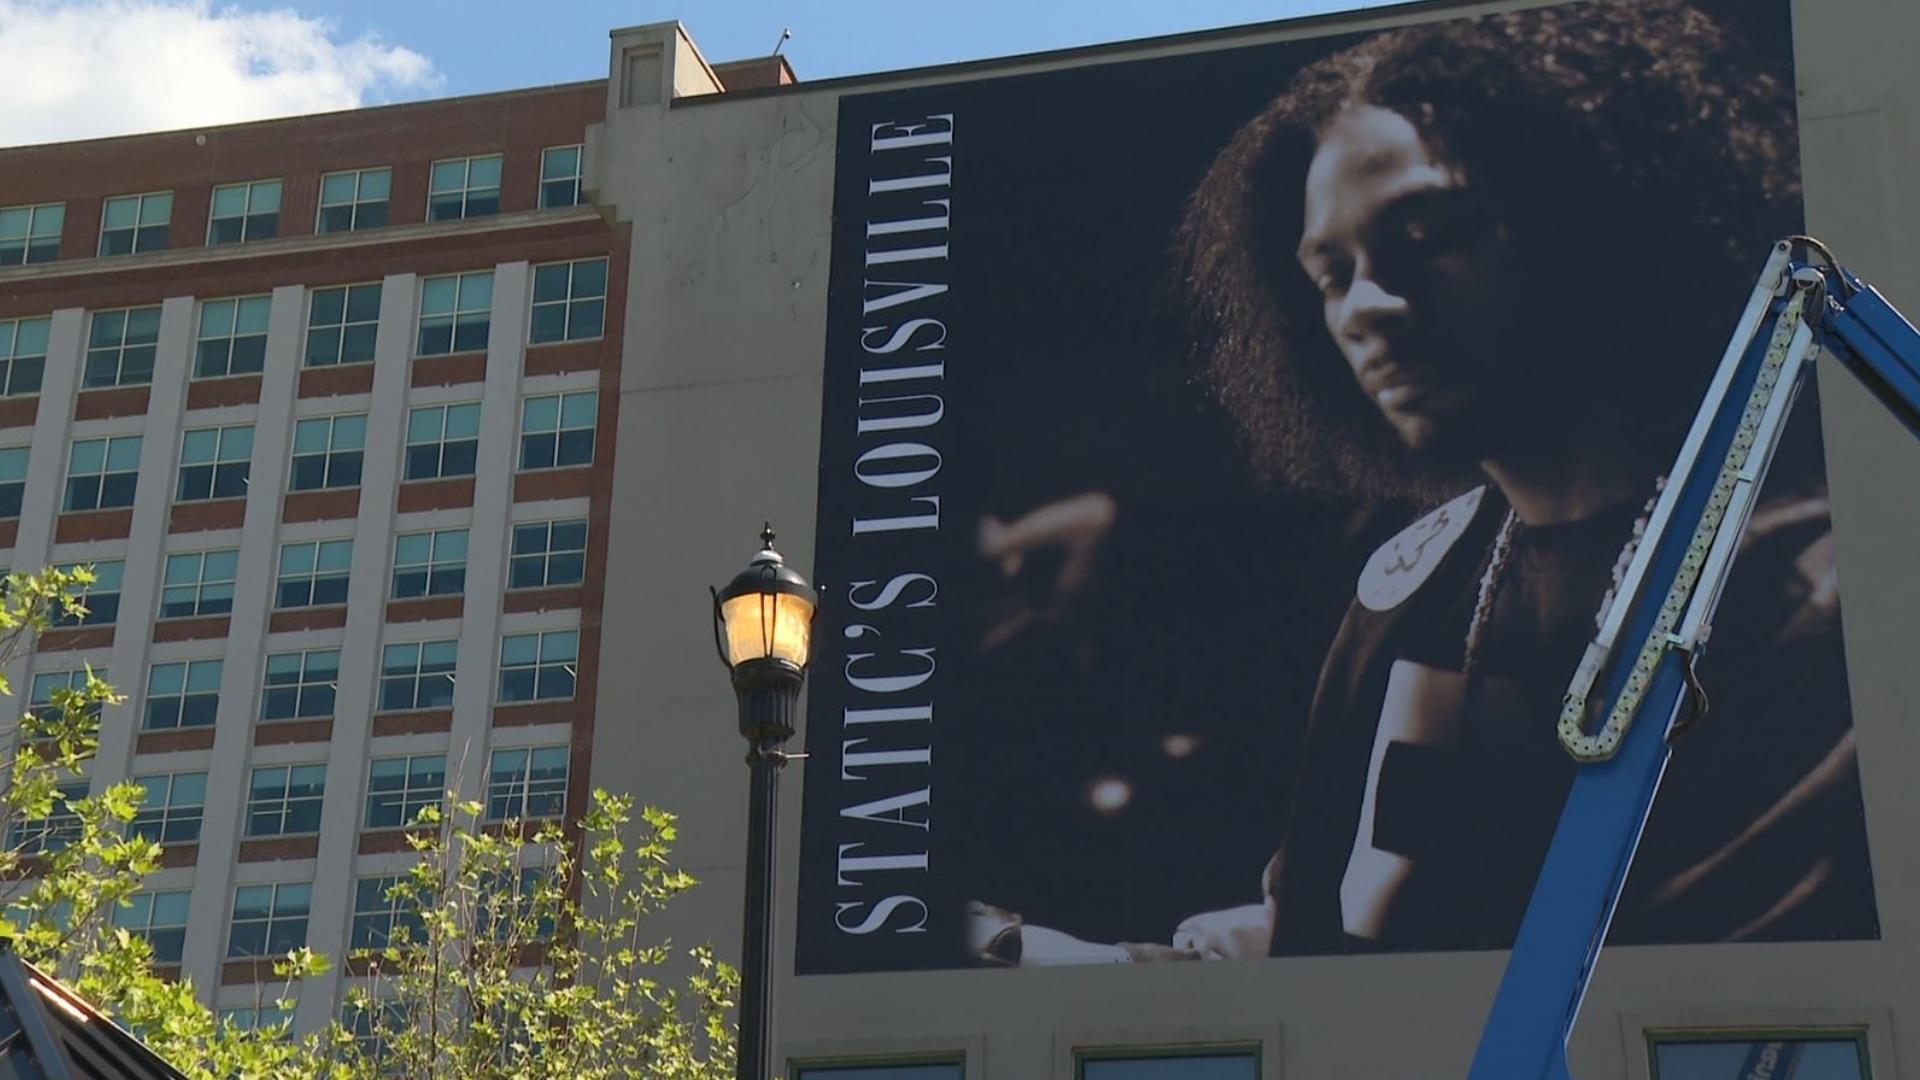 The late Grammy winner, known for his hit 'Lollipop' with Lil' Wayne was honored with a banner in downtown Louisville.